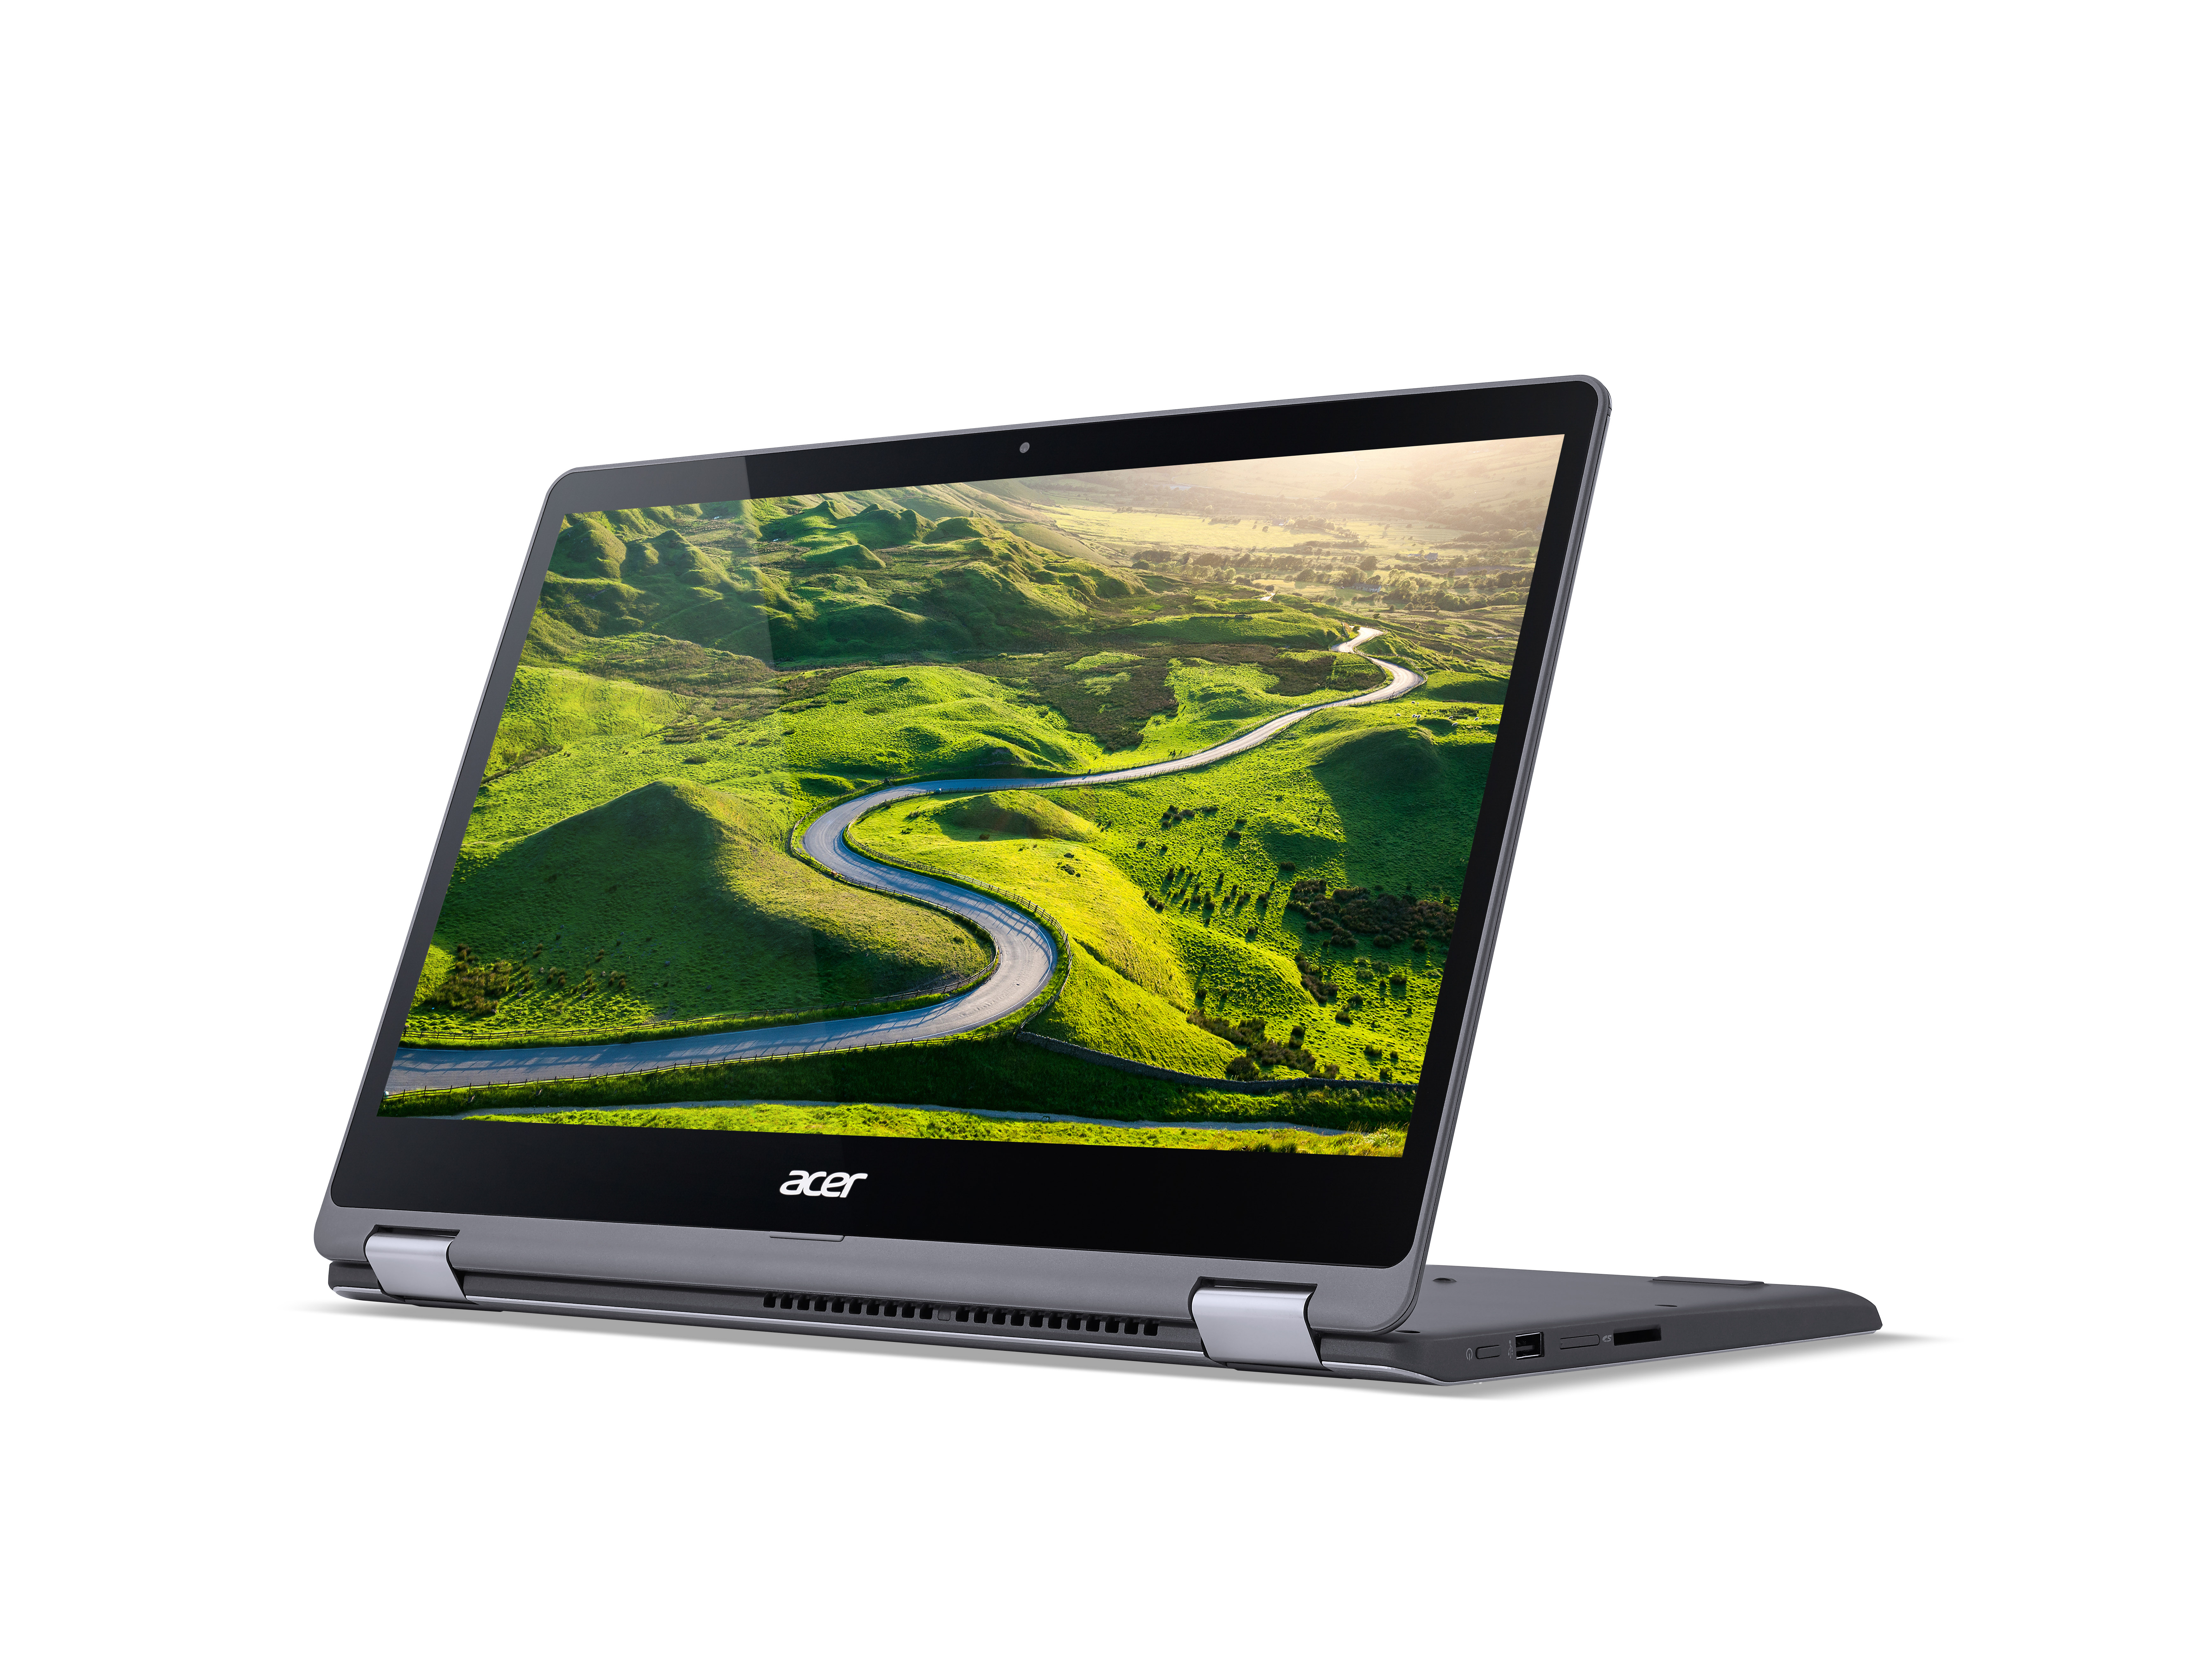 The Acer Aspire R 15 with Windows 10